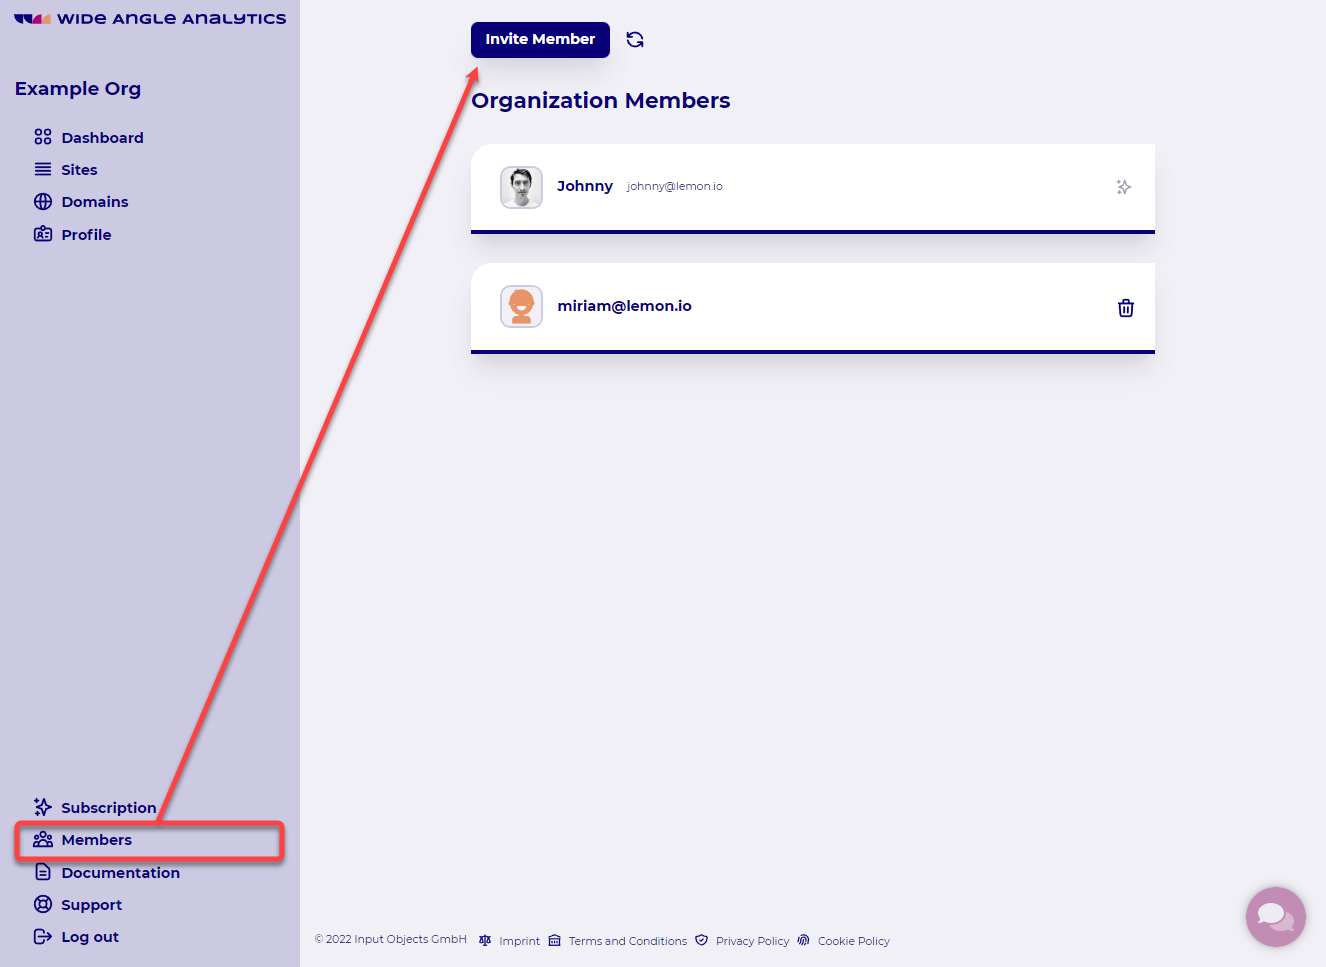 You will find the Invite Member action button in the Members section